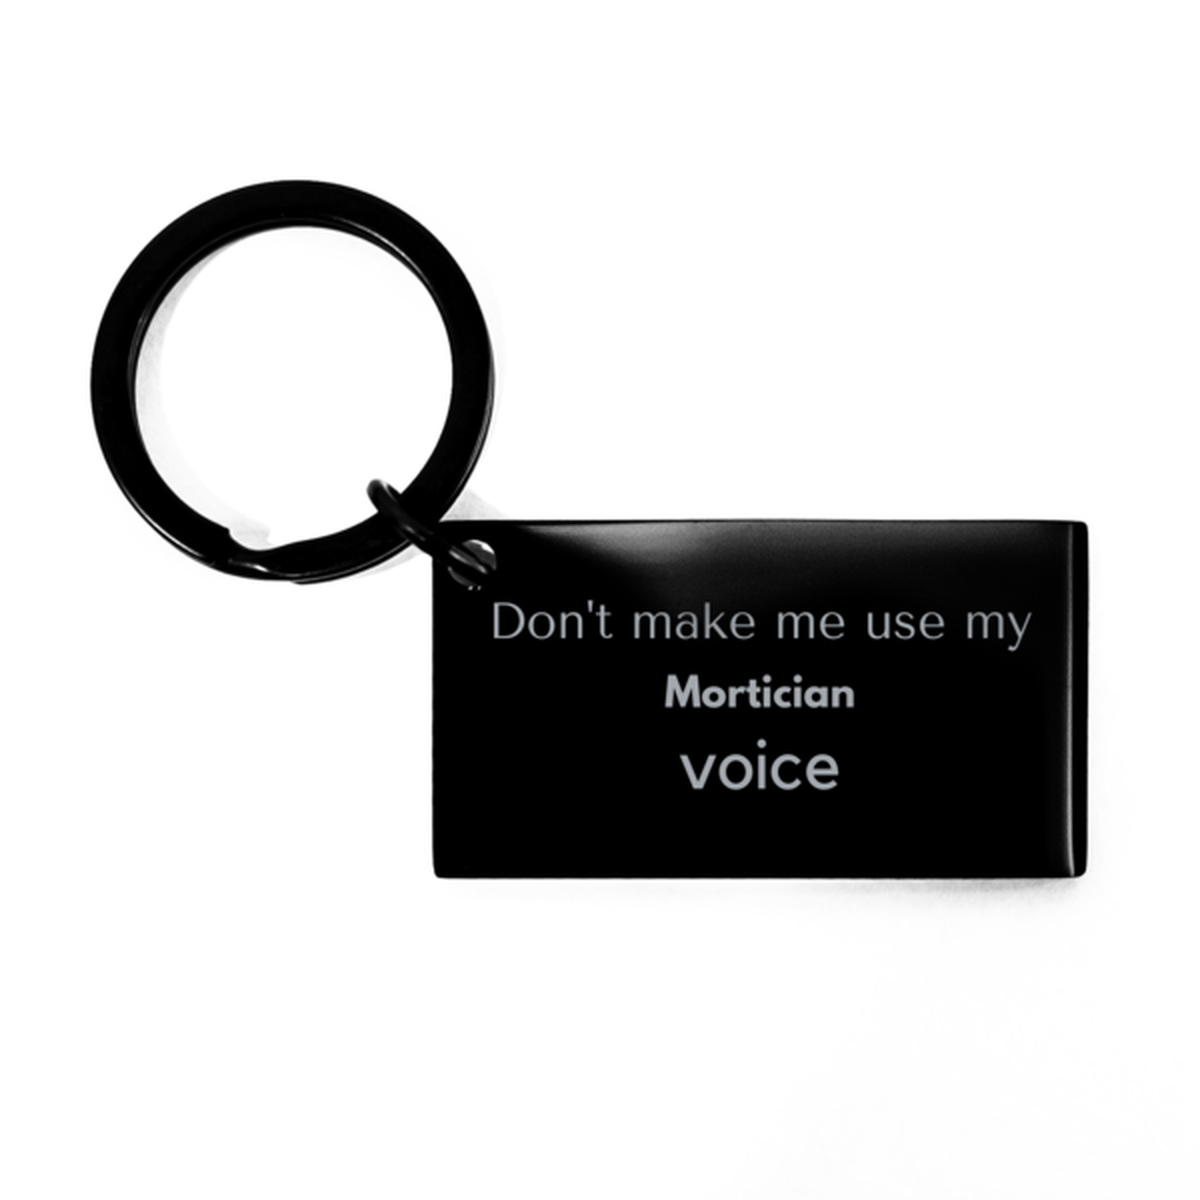 Don't make me use my Mortician voice, Sarcasm Mortician Gifts, Christmas Mortician Keychain Birthday Unique Gifts For Mortician Coworkers, Men, Women, Colleague, Friends